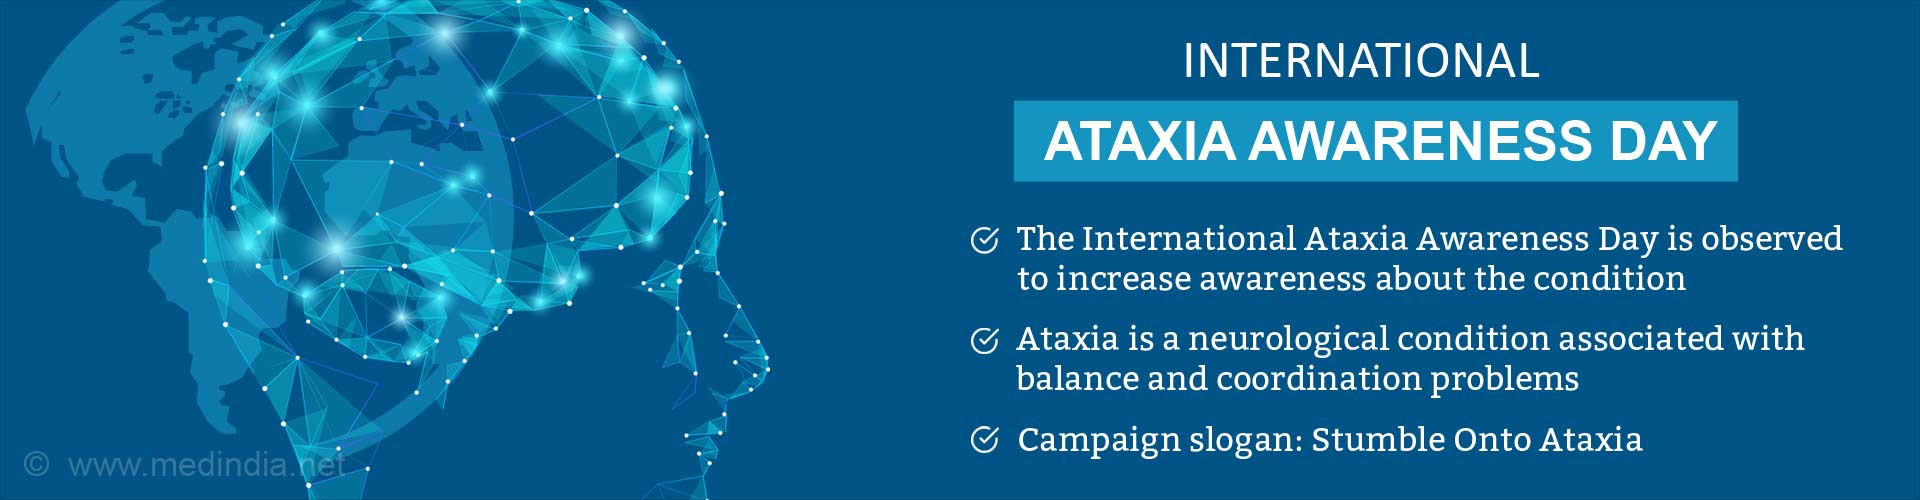 International Ataxia Awareness Day
- The International Ataxia Awareness Day is observed to increase awareness about the condition
- Ataxia is a neurological condition associated with balance and coordination problems
- Campaign slogan: Stumble Onto Ataxia